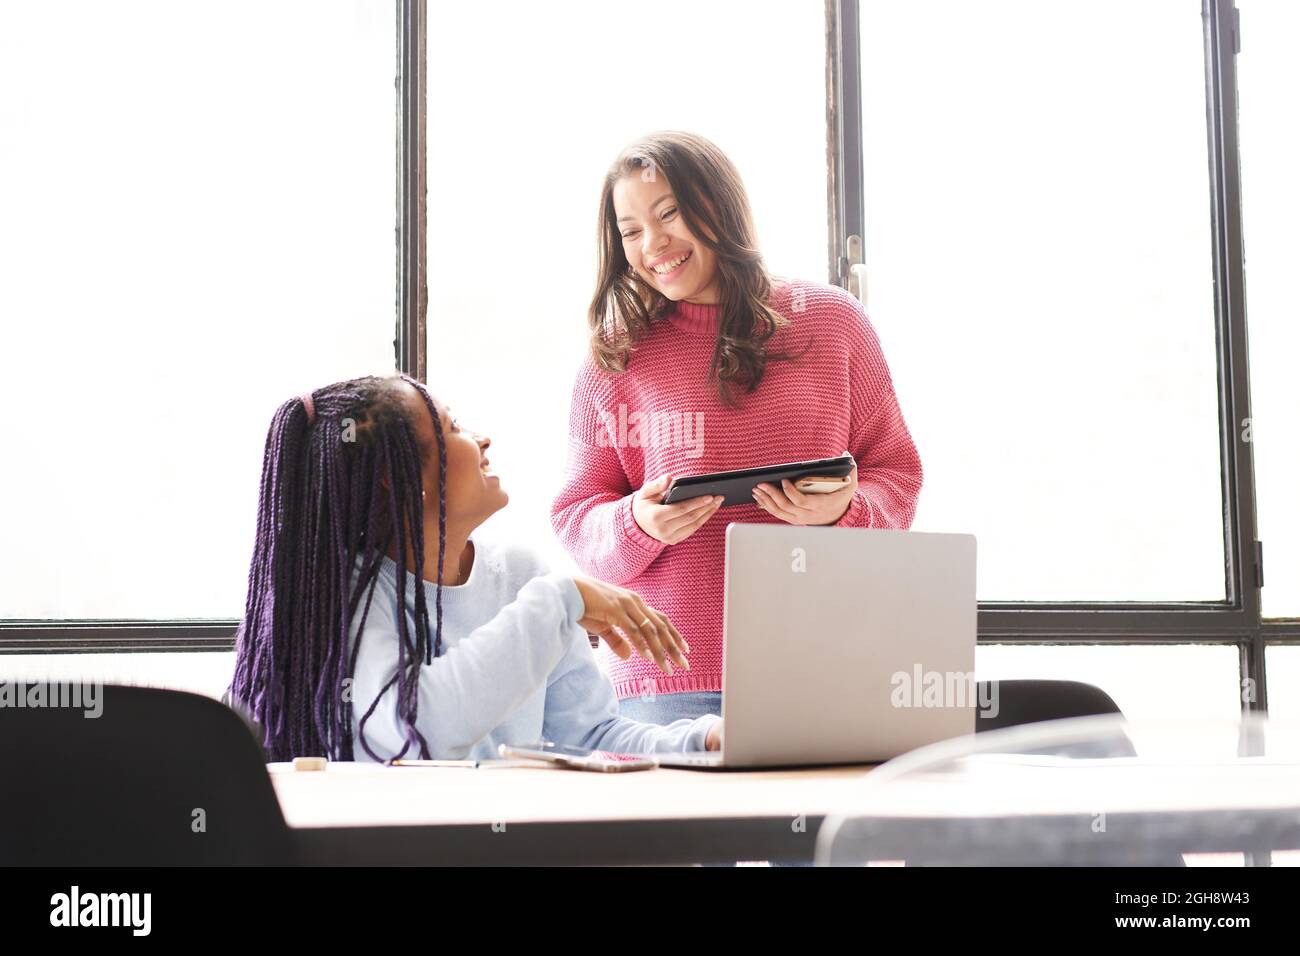 In the office: two women work together. They discuss work issues amicably while looking at the computer screen. Stock Photo